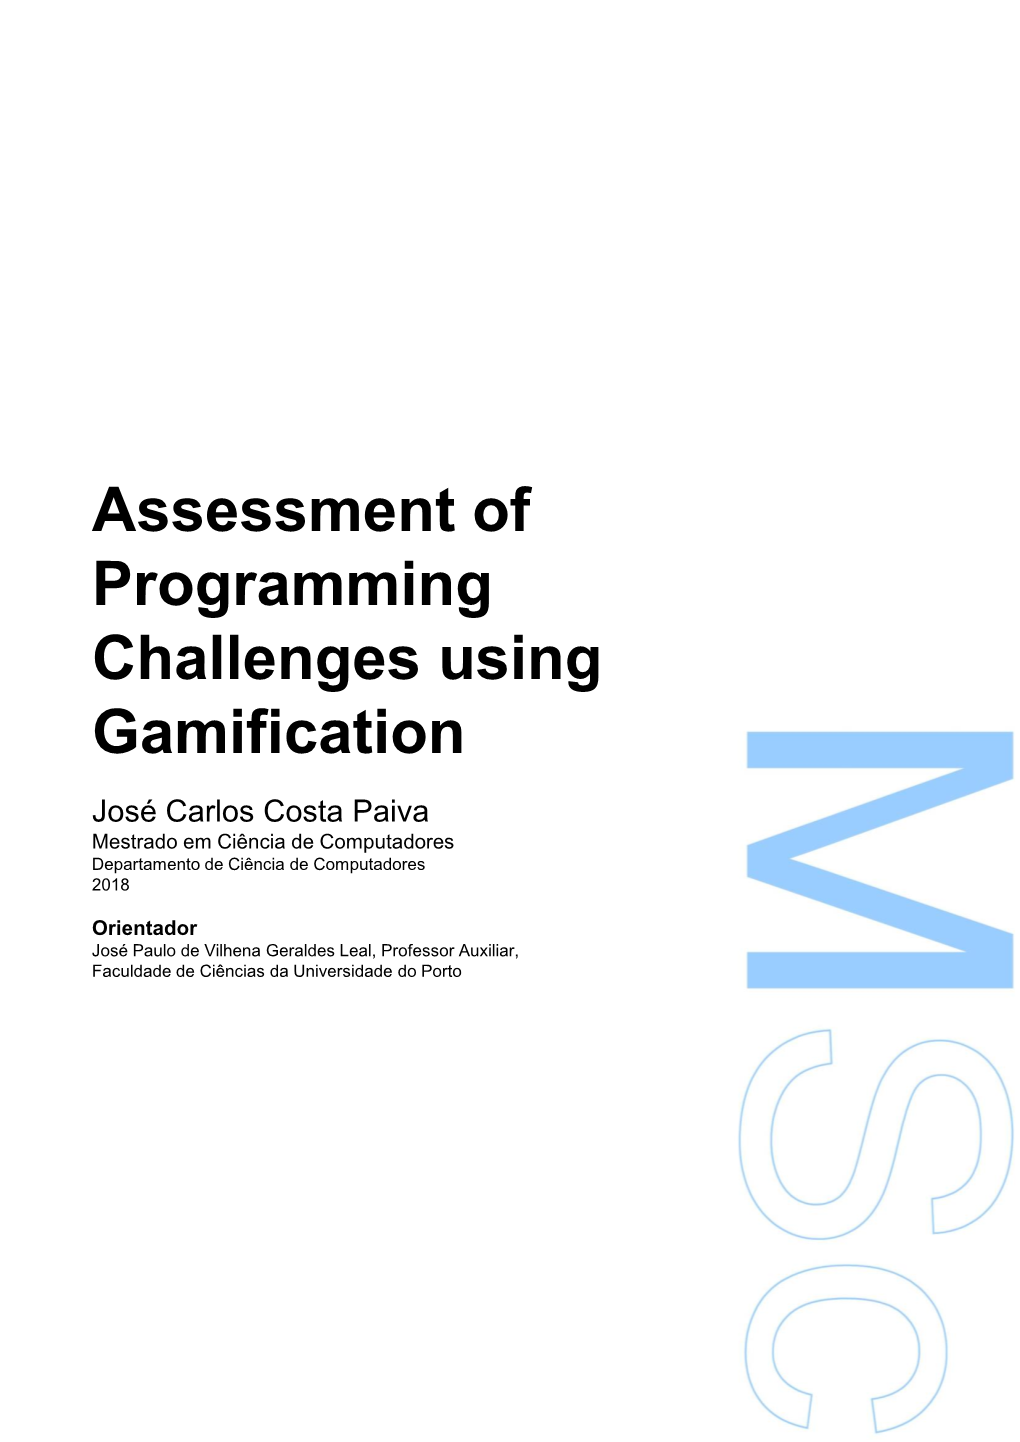 Assessment of Programming Challenges Using Gamification